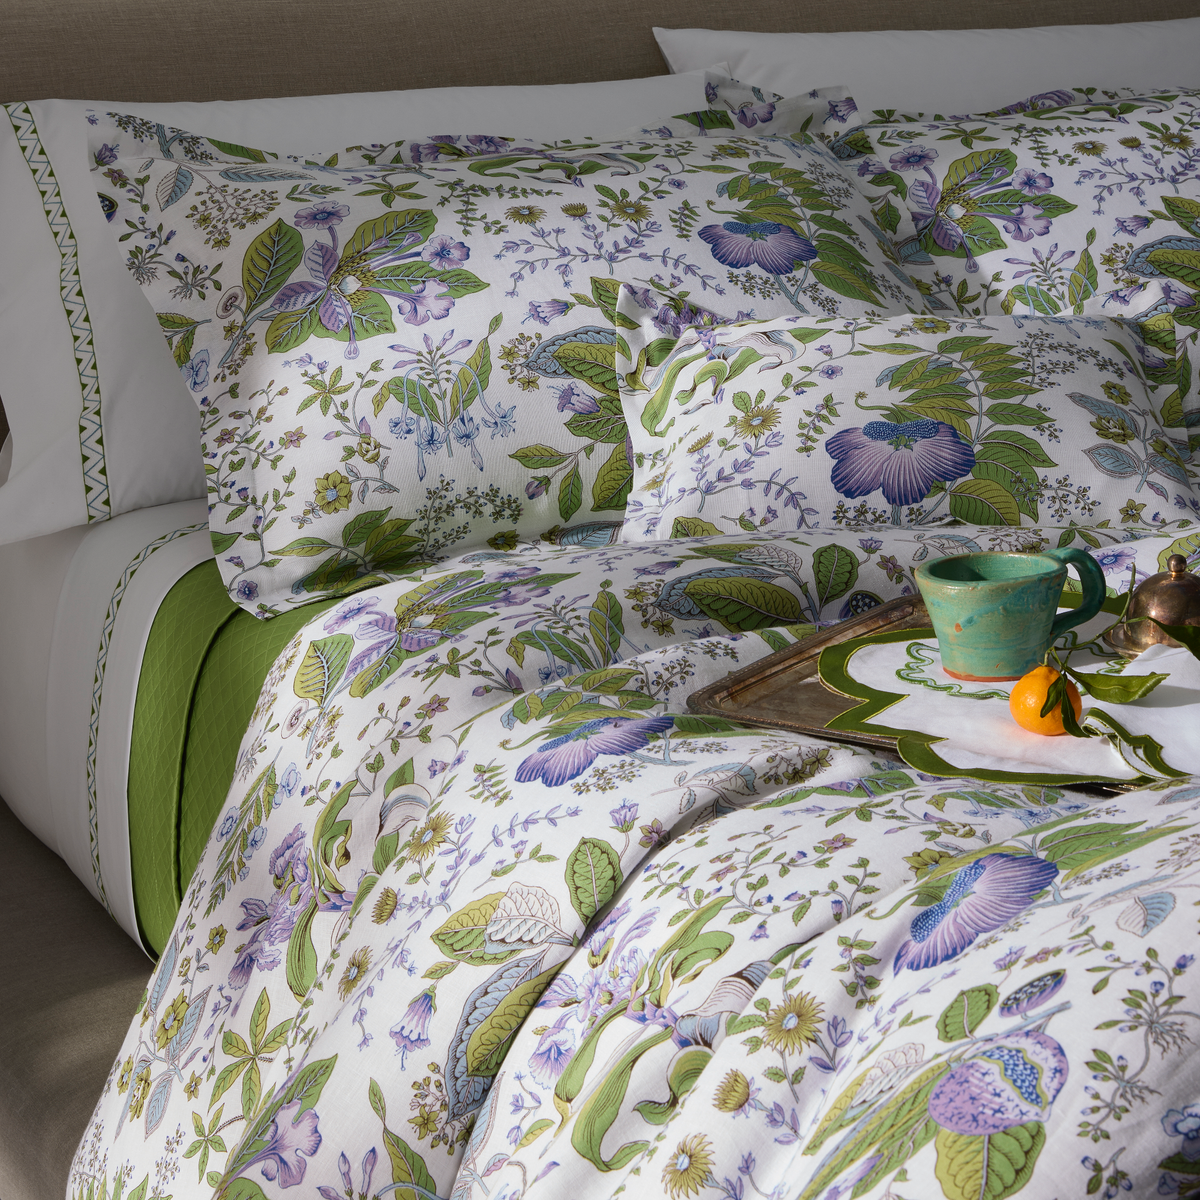 Lifestyle Picture of Side Full Bed of Matouk Schumacher Pomegranate Linen Bedding in Lilac Color with a Mug of Tea